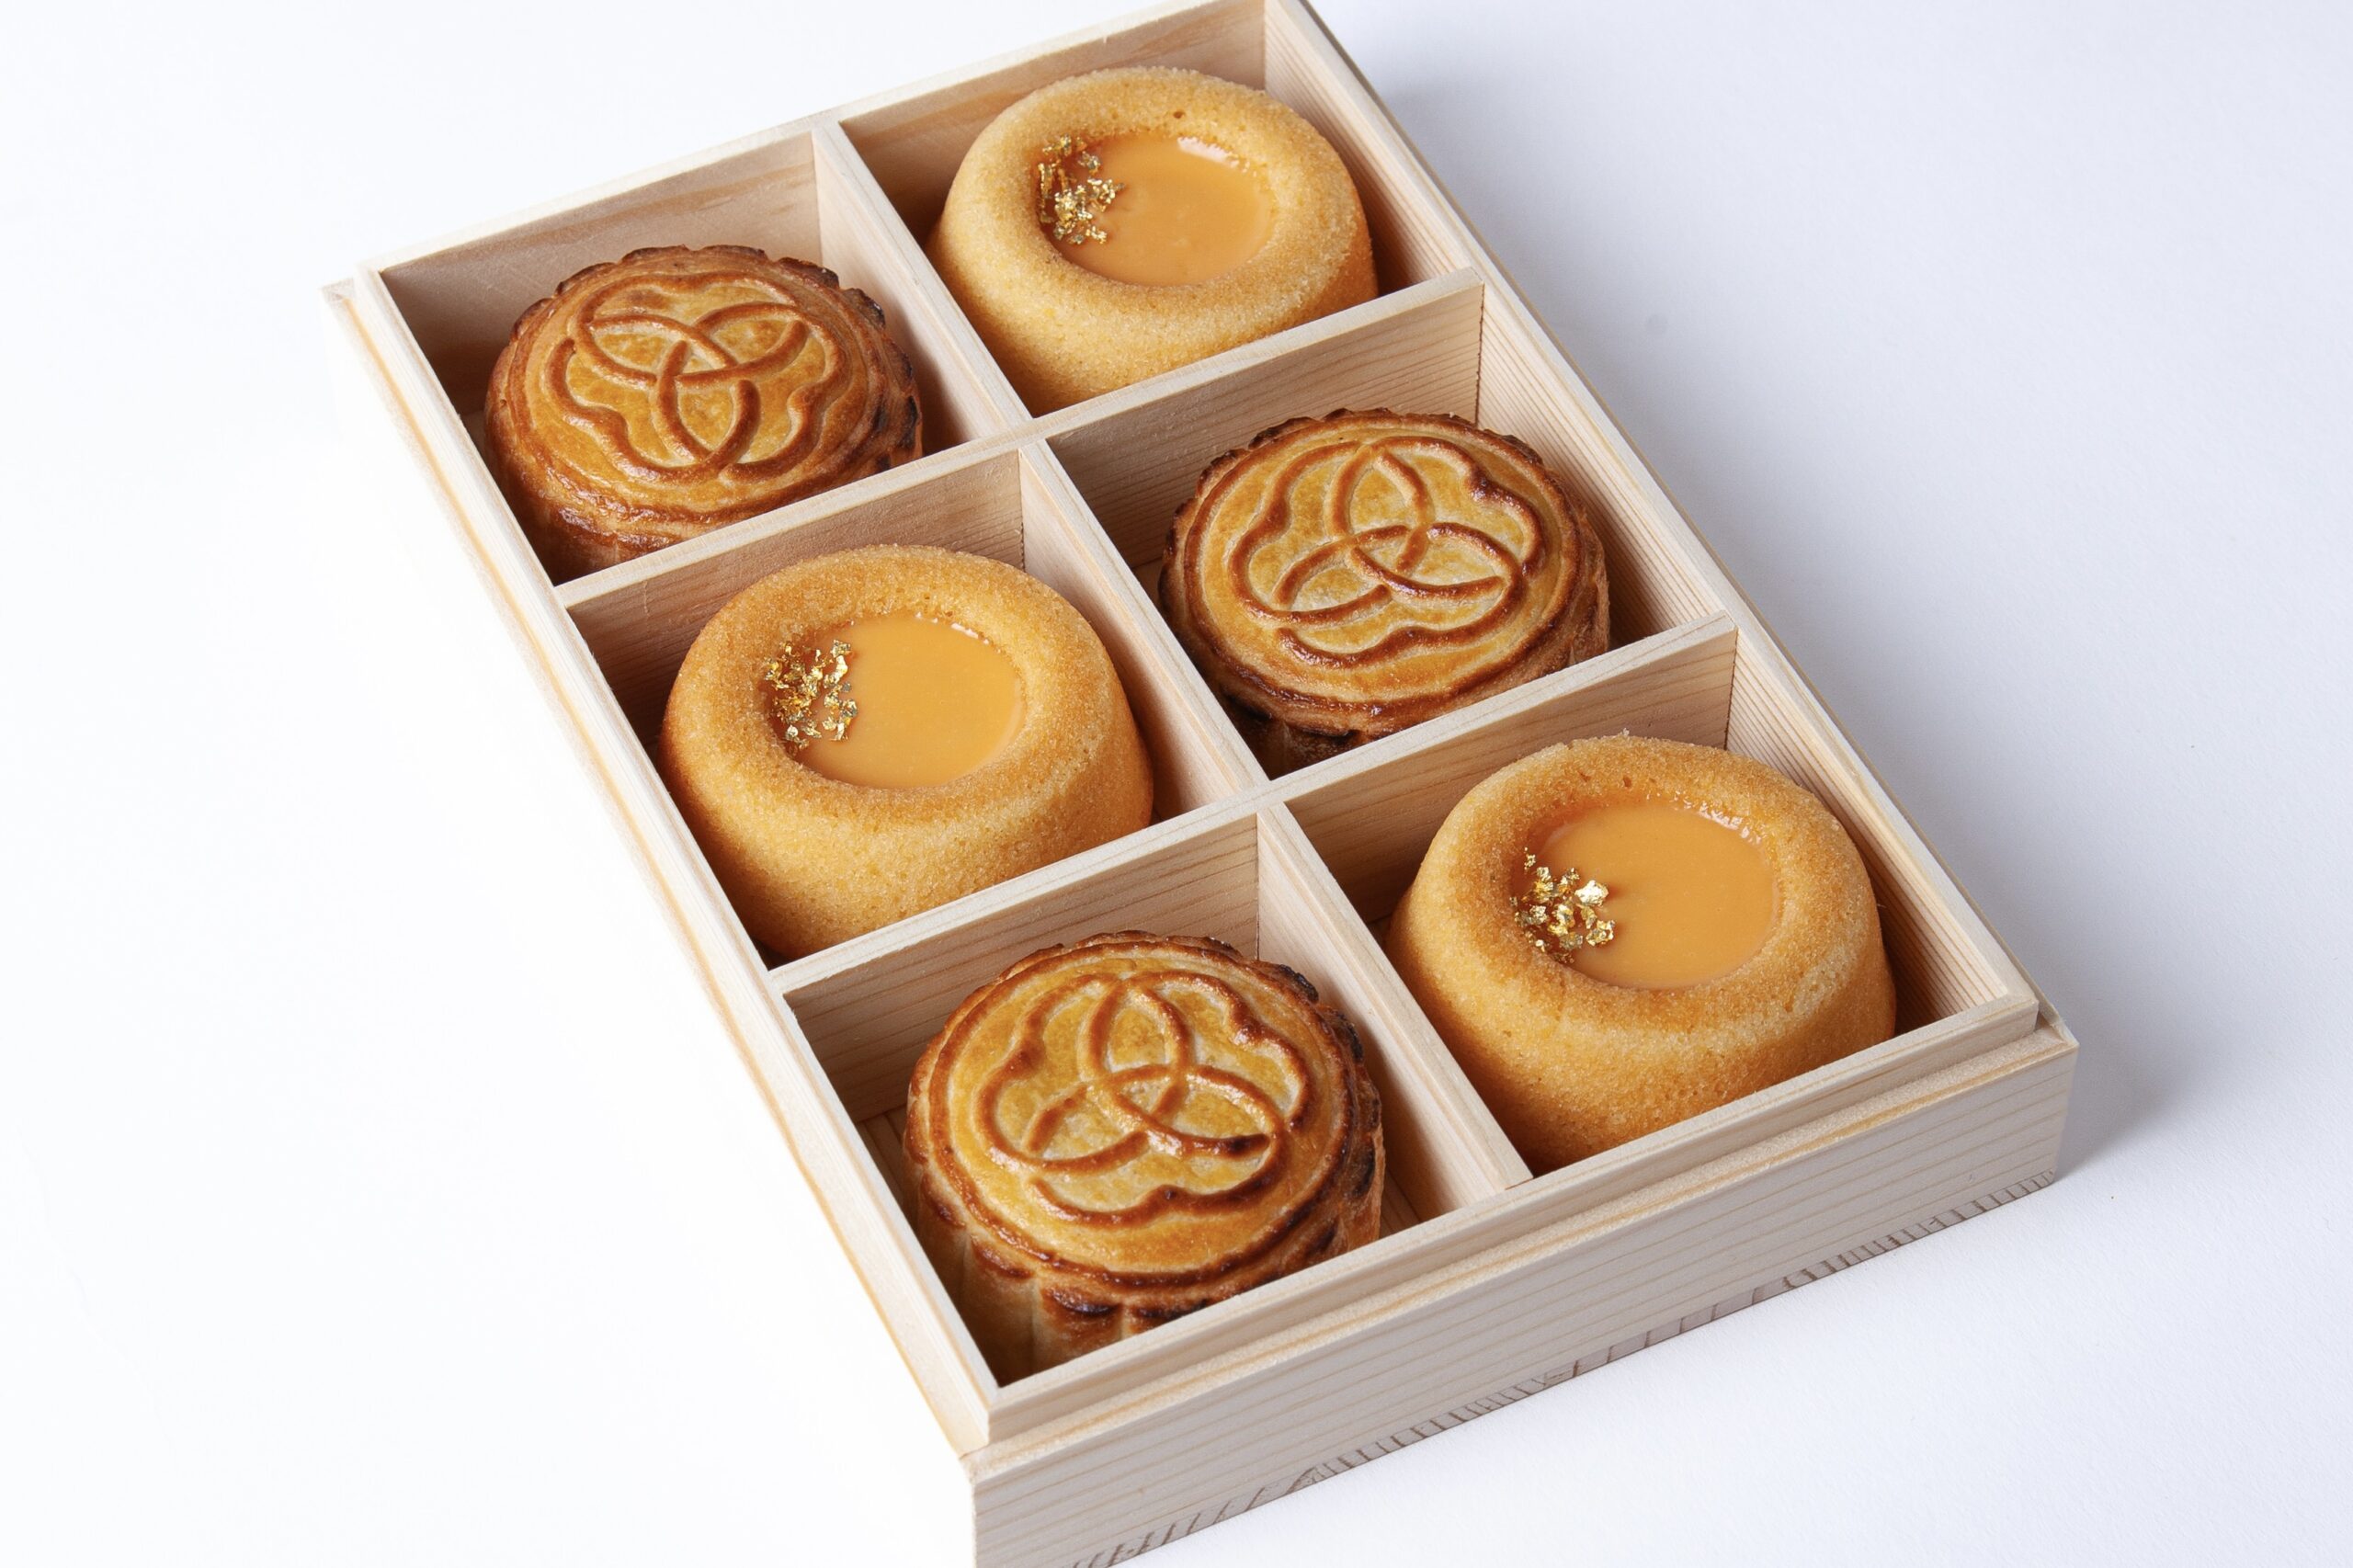 The Ān Soy and Esca mooncakes come in two flavours: black sesame and salted egg soy milk. They come in a 2x3 wooden box, partitioned so that each mooncake has its own space.